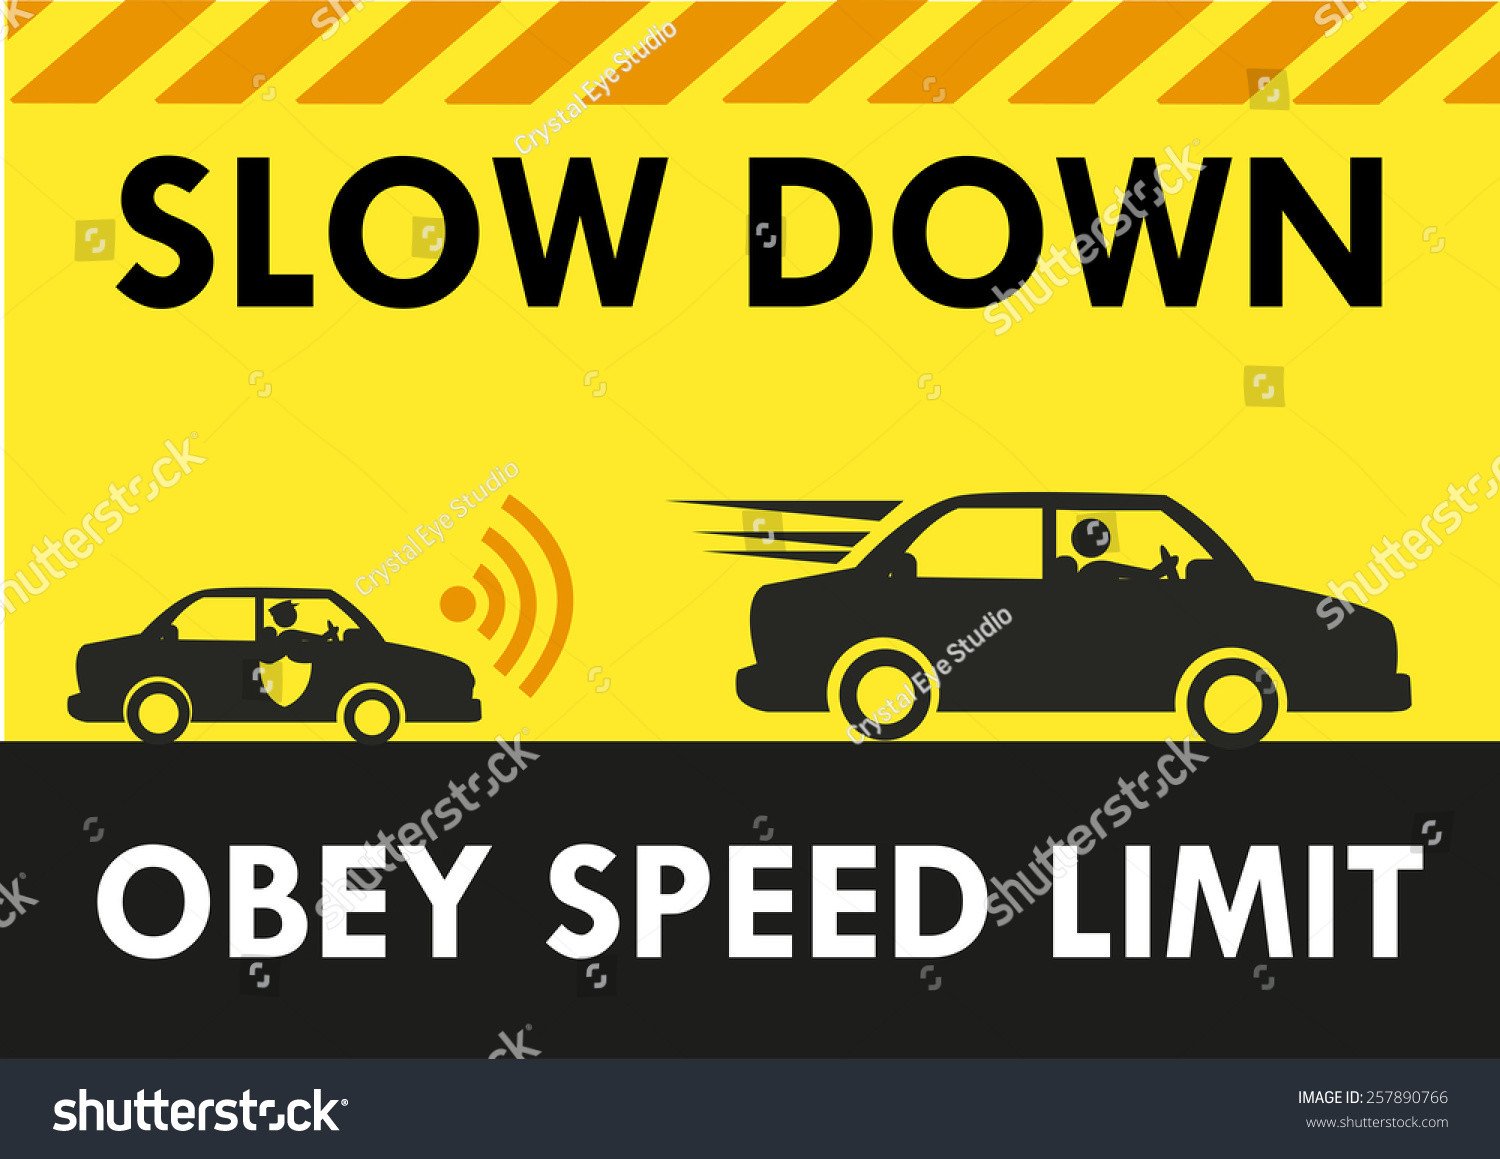 Slow Down Obey Speed Limit Signboard Design Template With